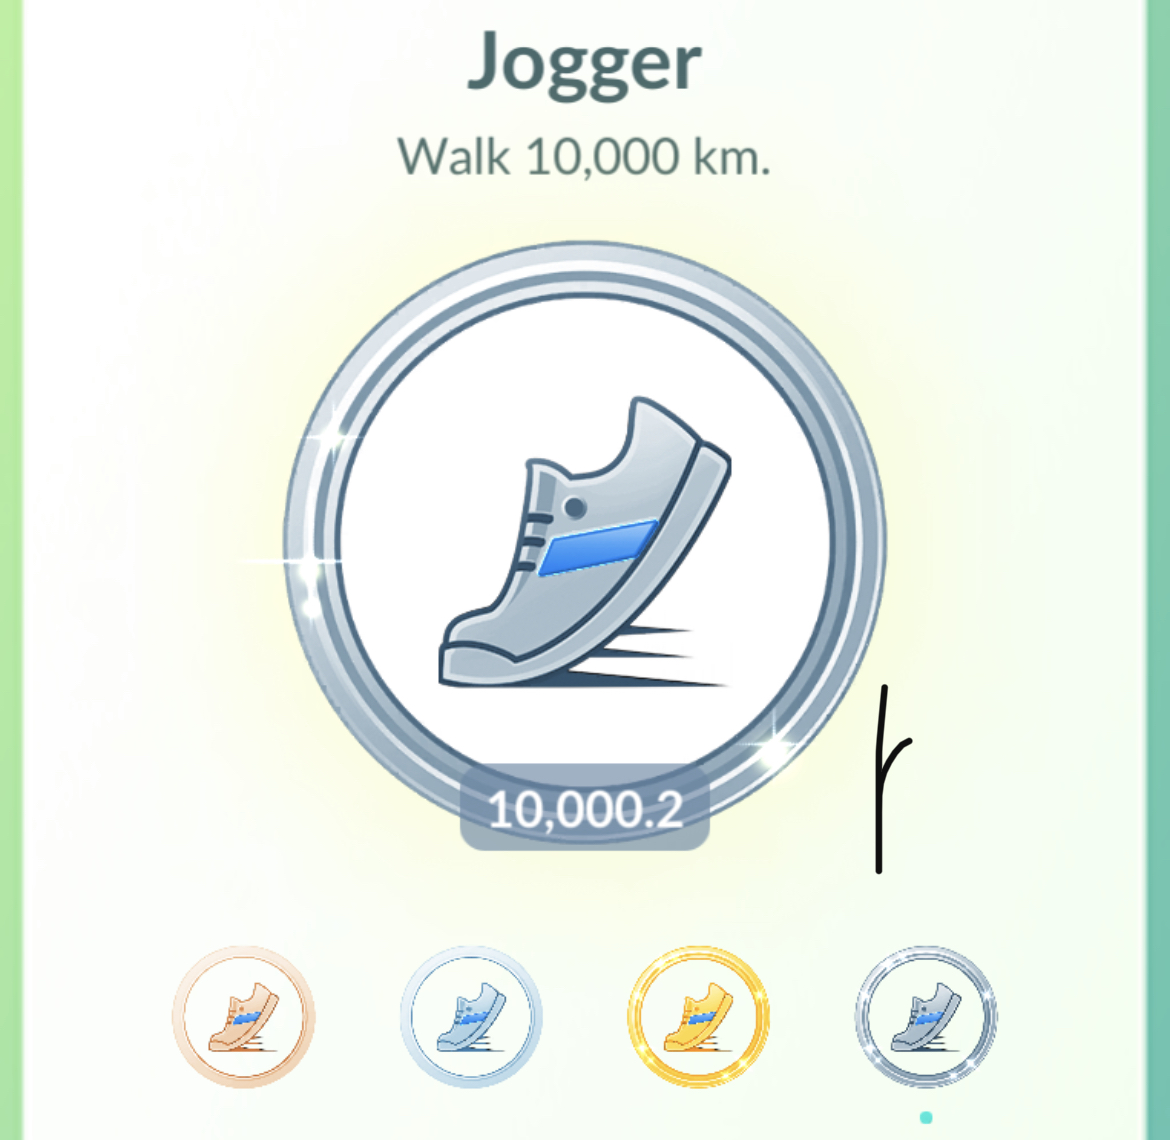 Jogger medal for walking 10,000km in game